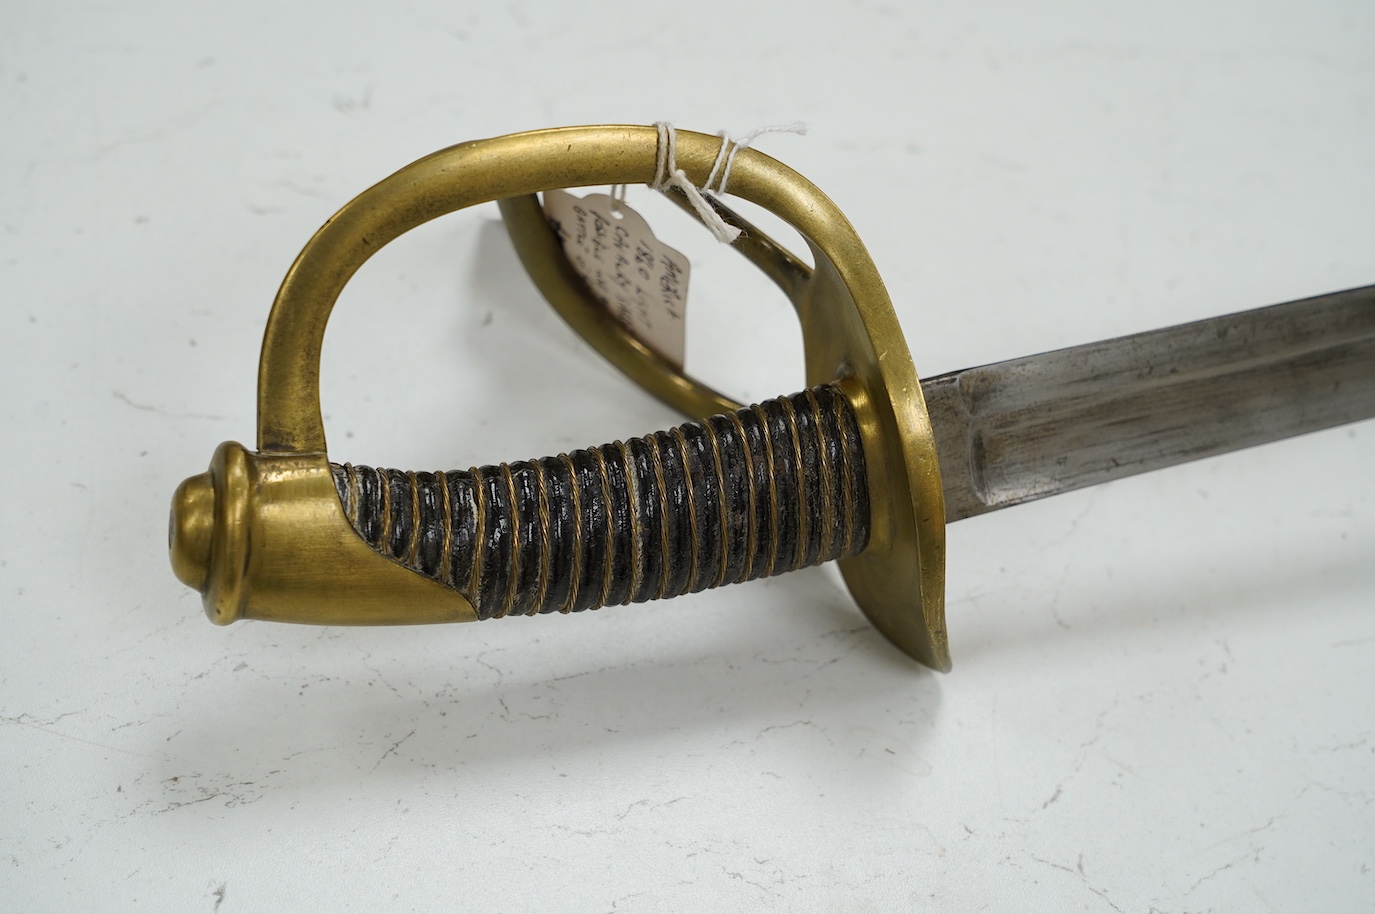 A German c.1860 light cavalry trooper’s sword by WRK, with German government inspector’s marks, 89.5cm. Condition - good